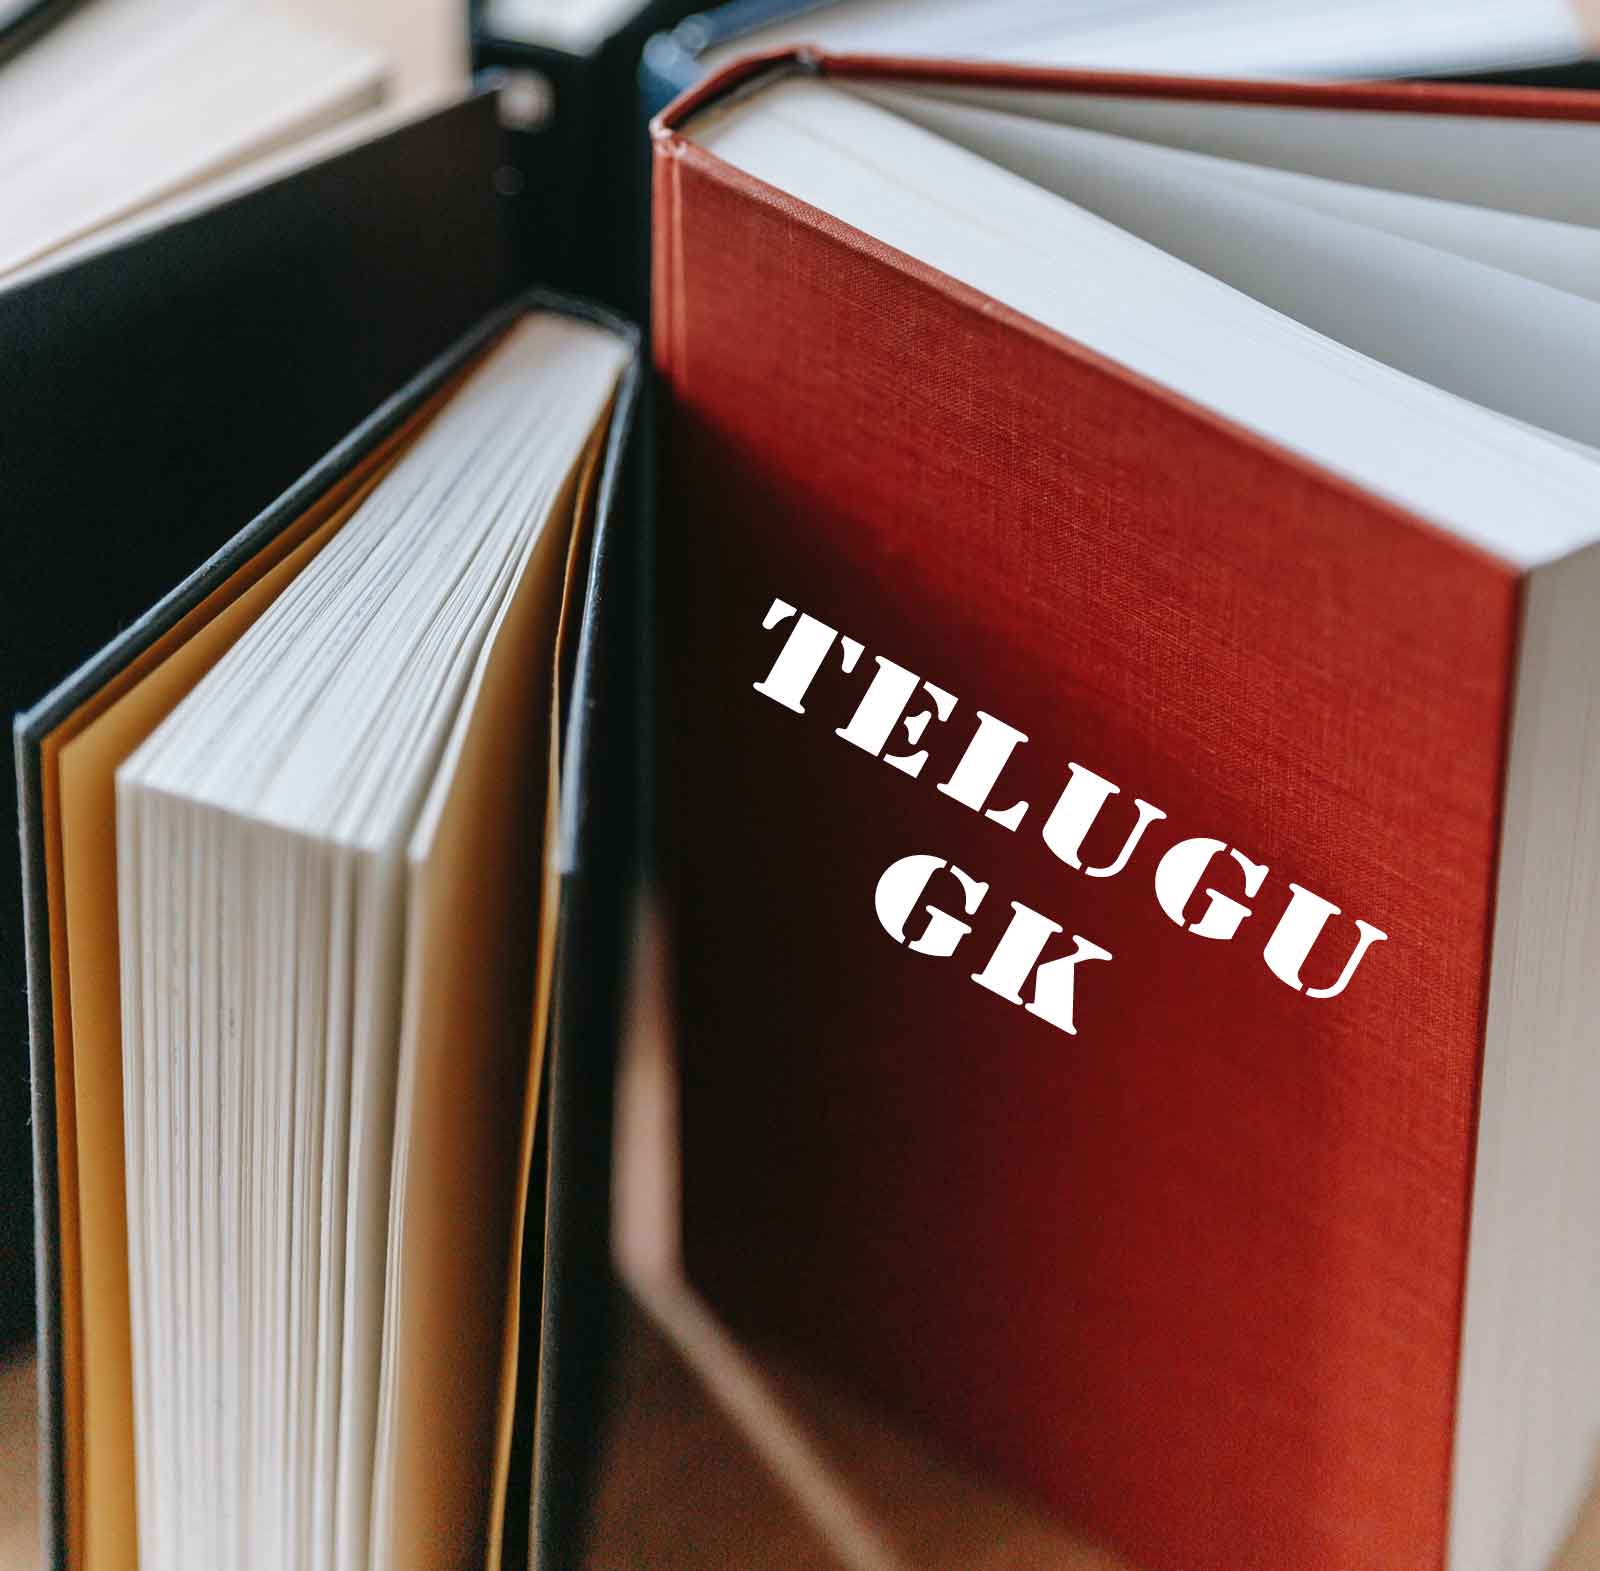 Telugu GK Previous Questions and Answers